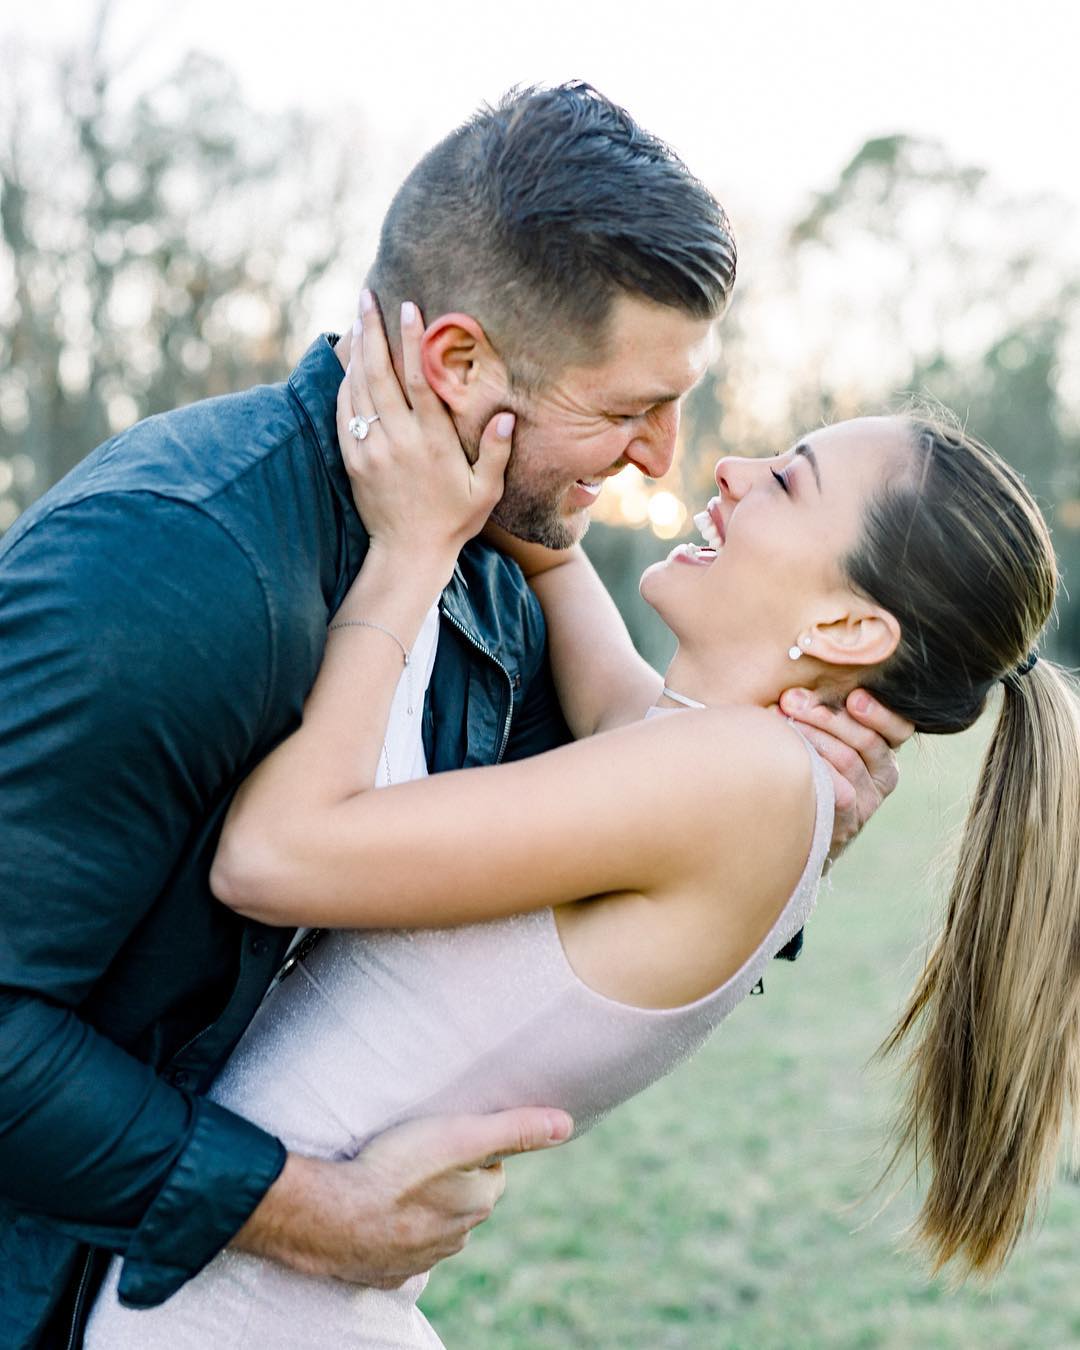 7.25-carat solitaire ring  : Demi-Leigh Nel-Peters & NFL Star Tim Tebow are Engaged! jaiyeorie